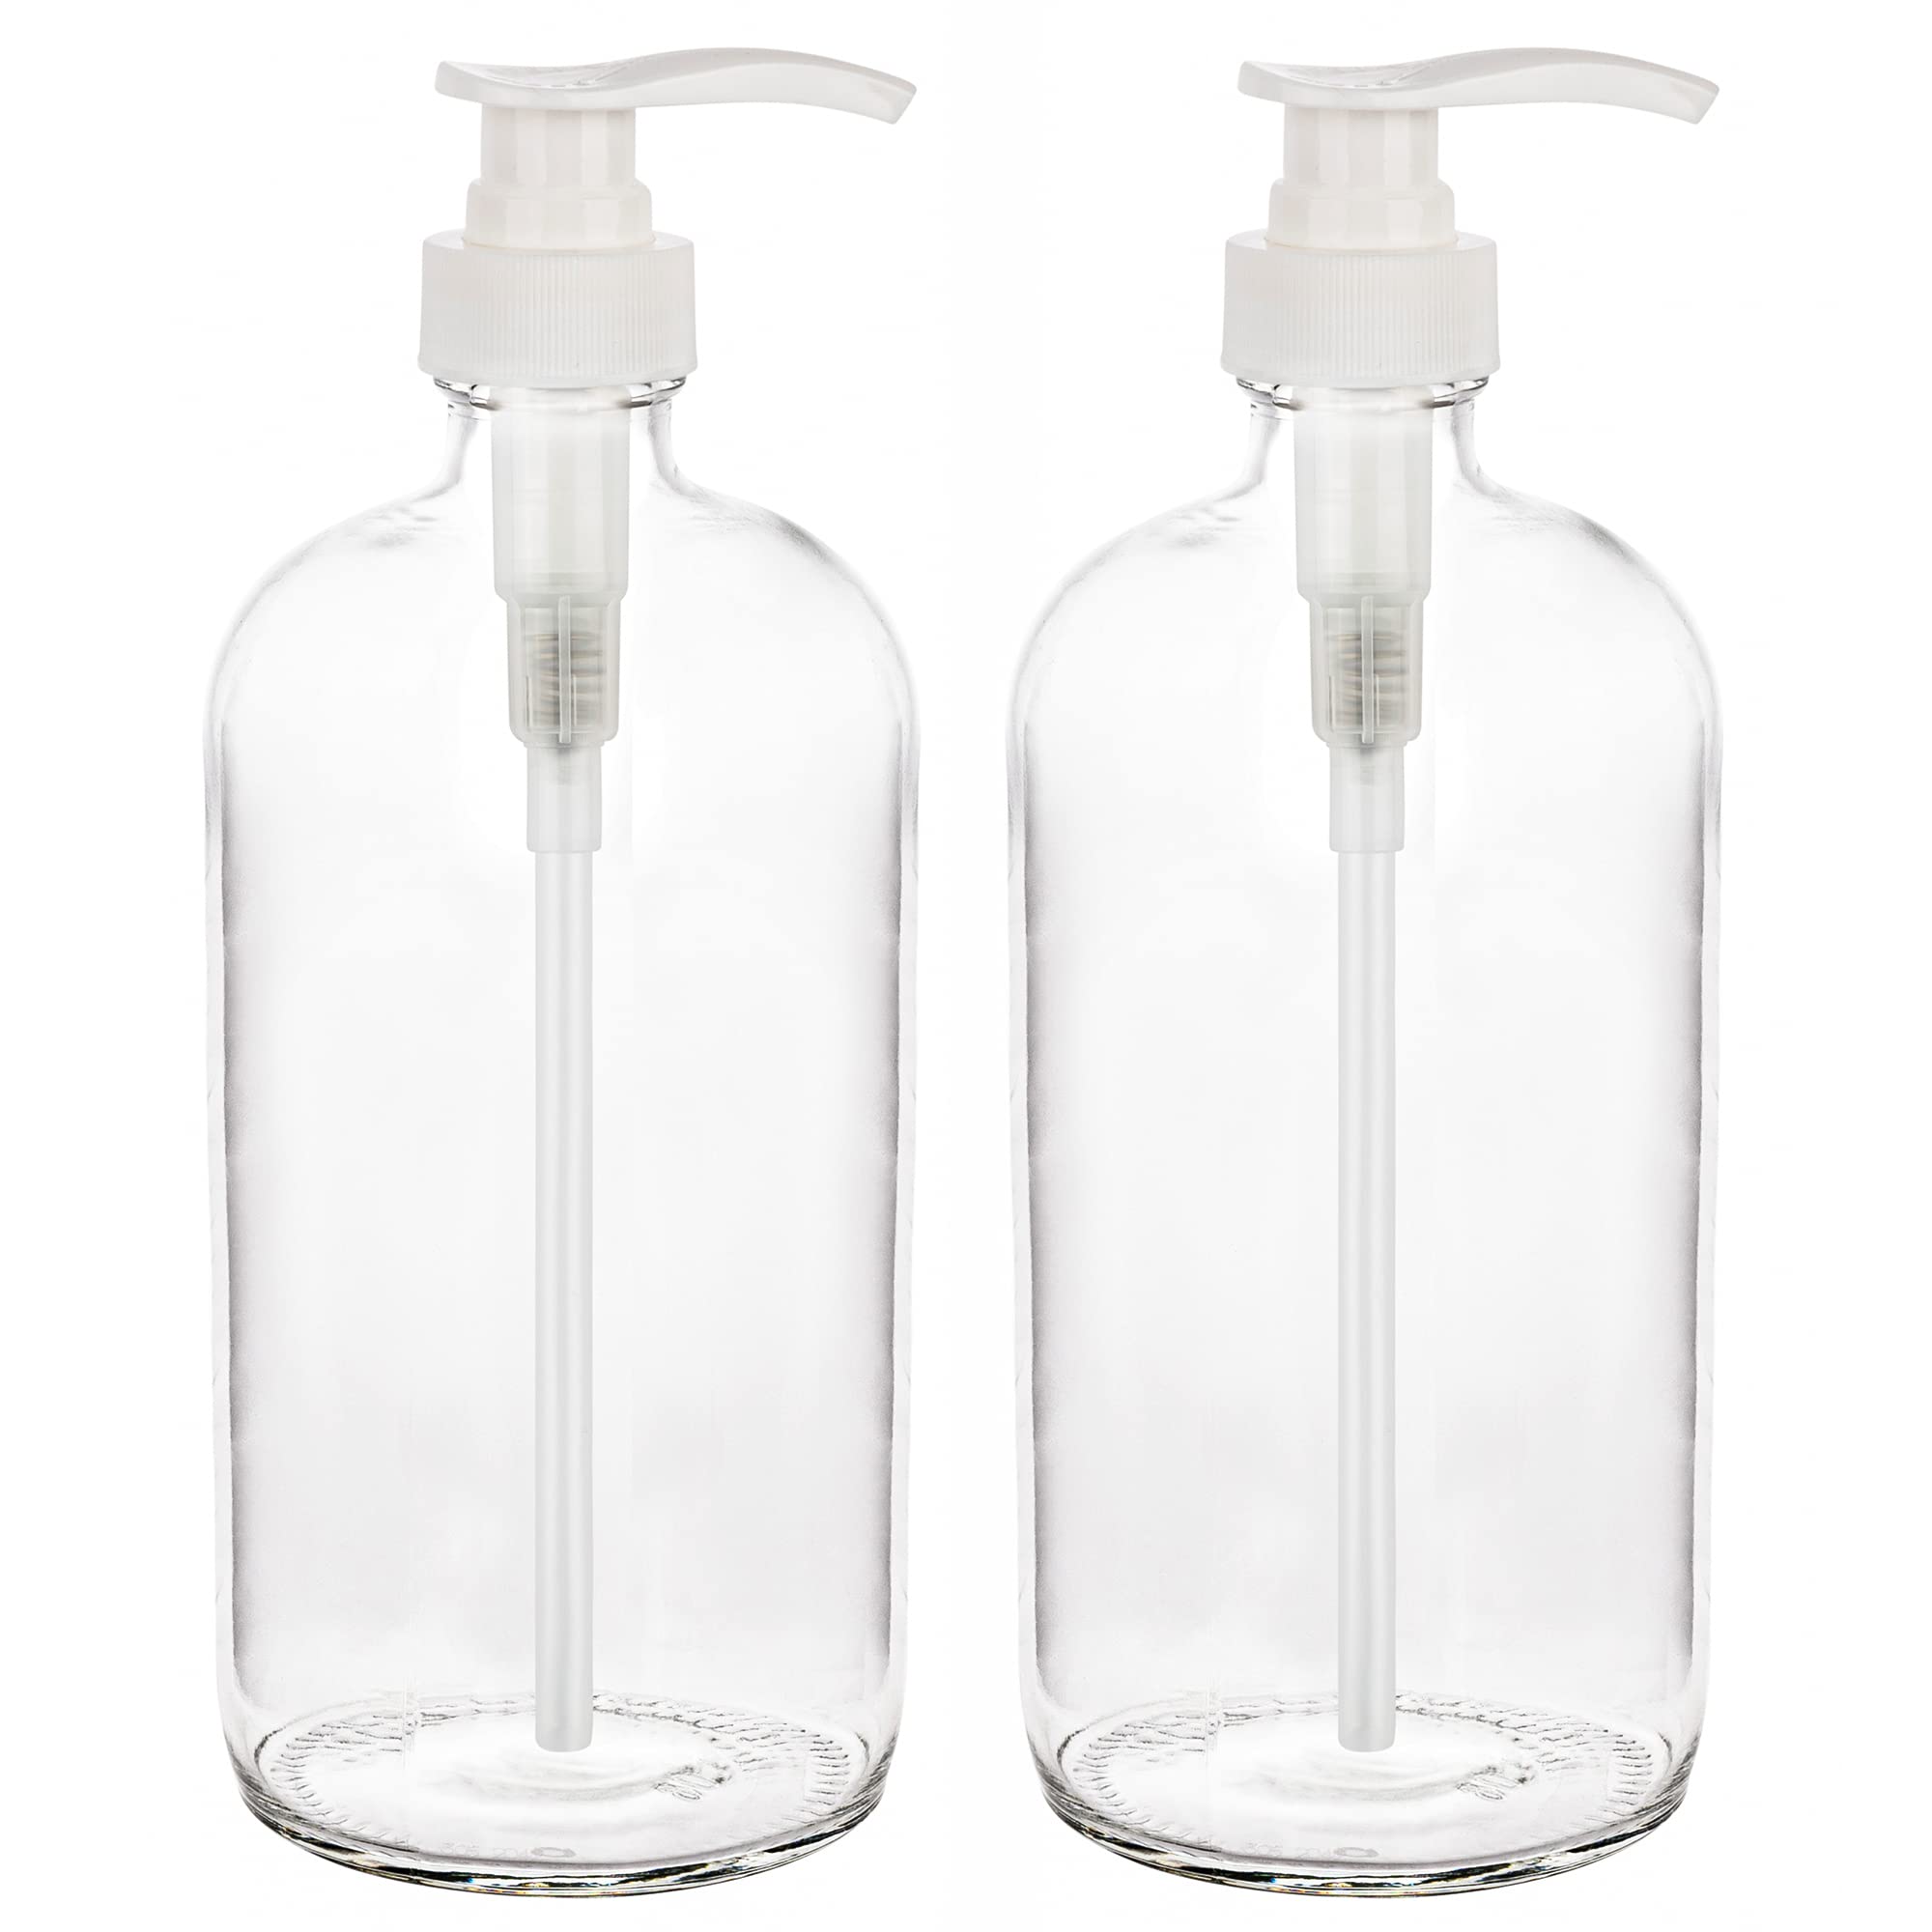 kitchentoolz 32-Ounce Large Clear Glass Boston Round Bottles w/Pumps. Great for Lotions, Soaps, Oils, Sauces - Food Safe and Medical Grade (Pack of 2)  - Like New